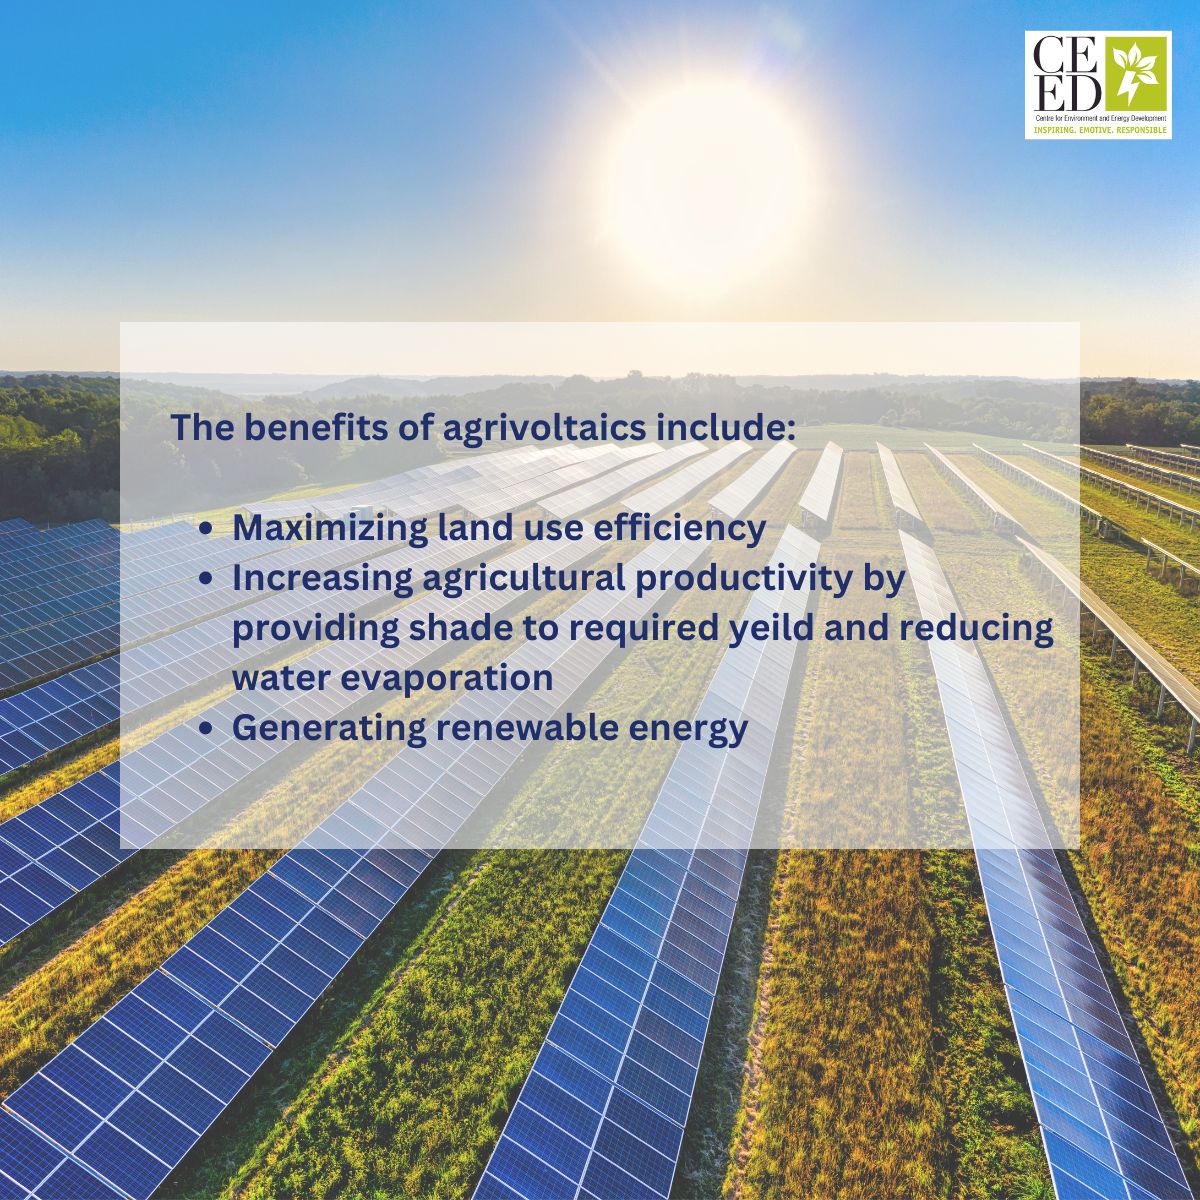 The practice of Agrivoltaics can help mitigate land-use conflicts by allowing farmers to continue agricultural activities while also participating in renewable energy production. #Agrivoltaics #SolarEnergy #Sustainability #Agriculture #RenewableEnergy